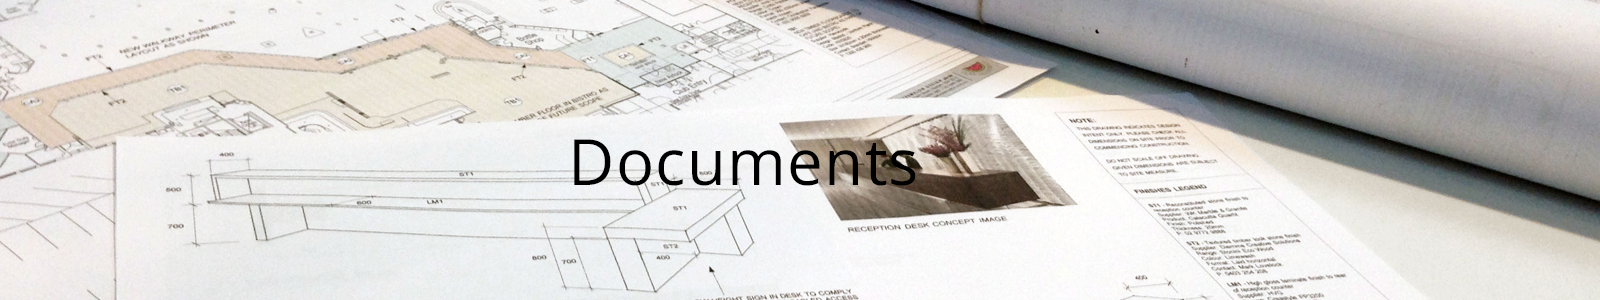 Documents and certification